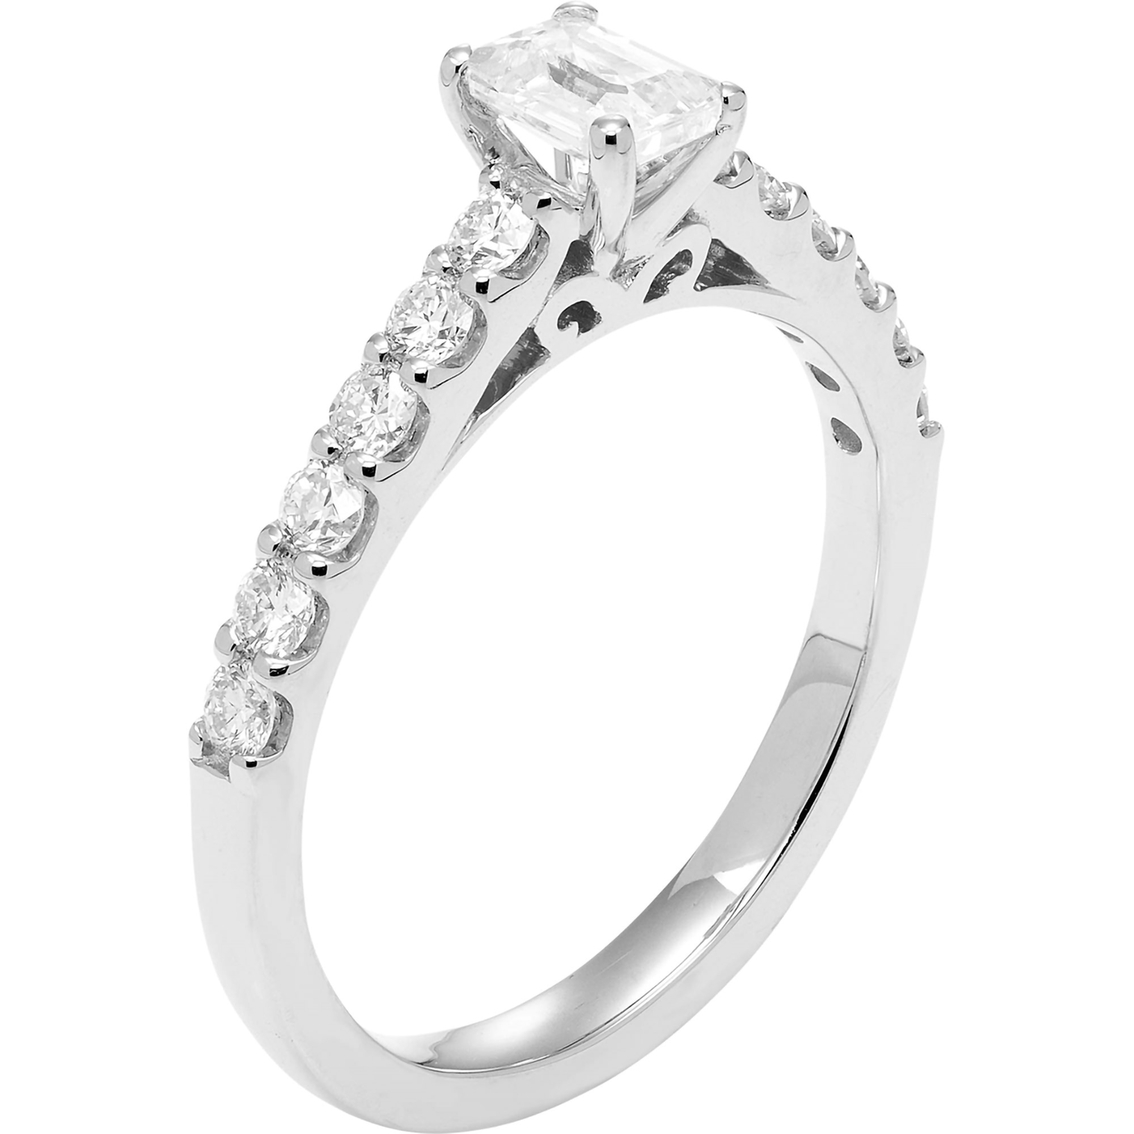 14K Gold 1 CTW Diamond Certified Engagement Ring - Image 2 of 3